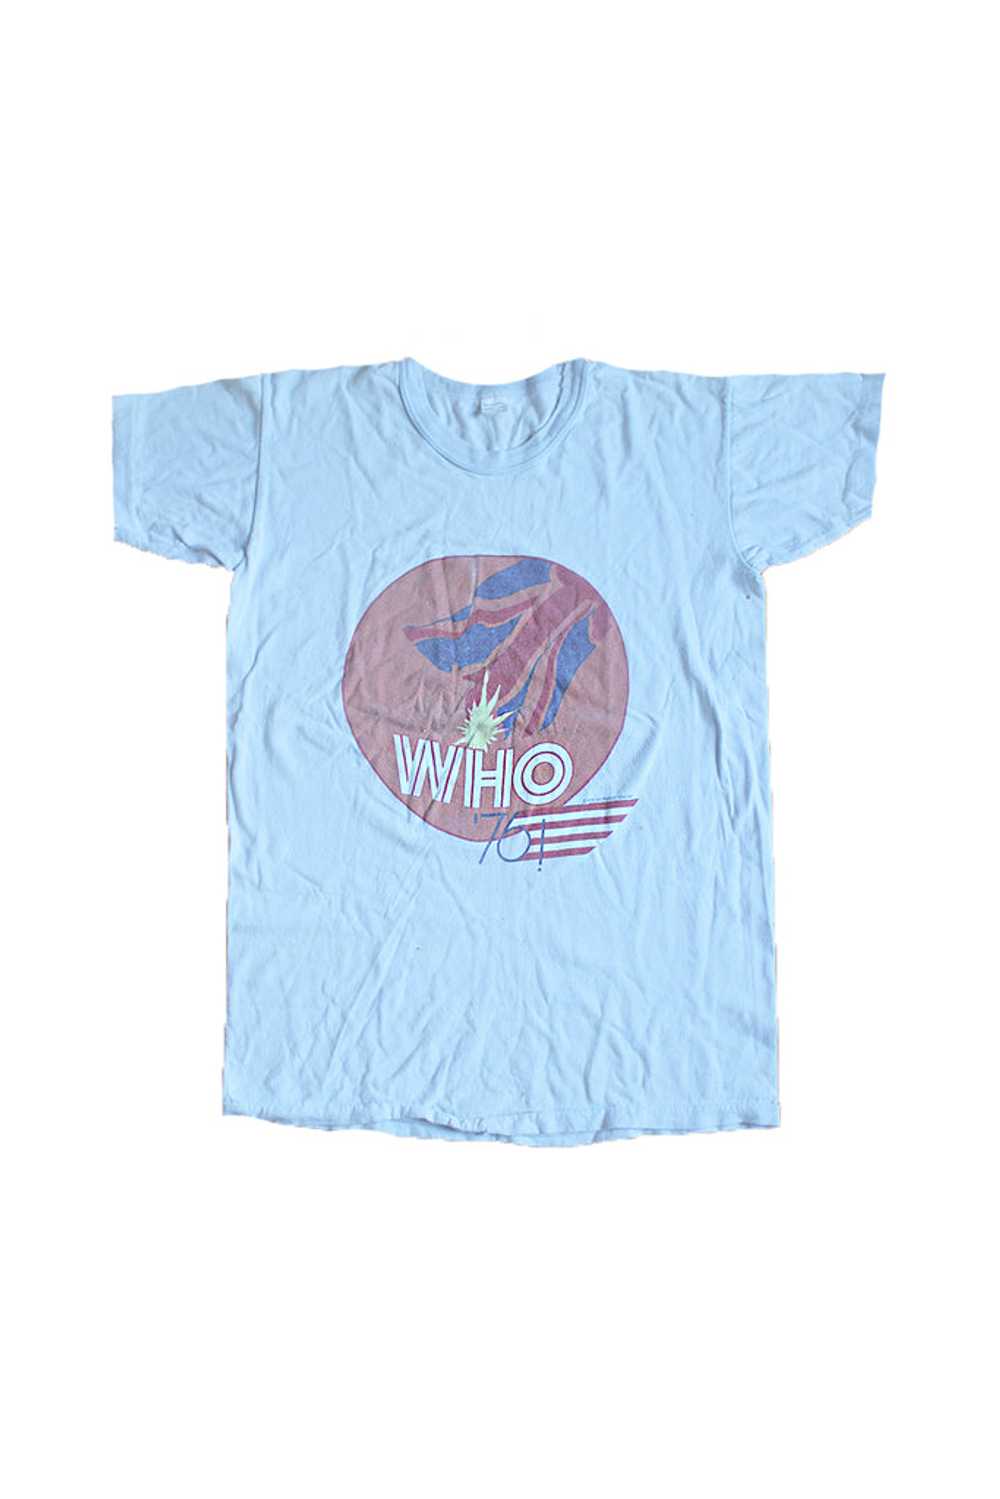 Vintage 70's The Who T-Shirt - image 1